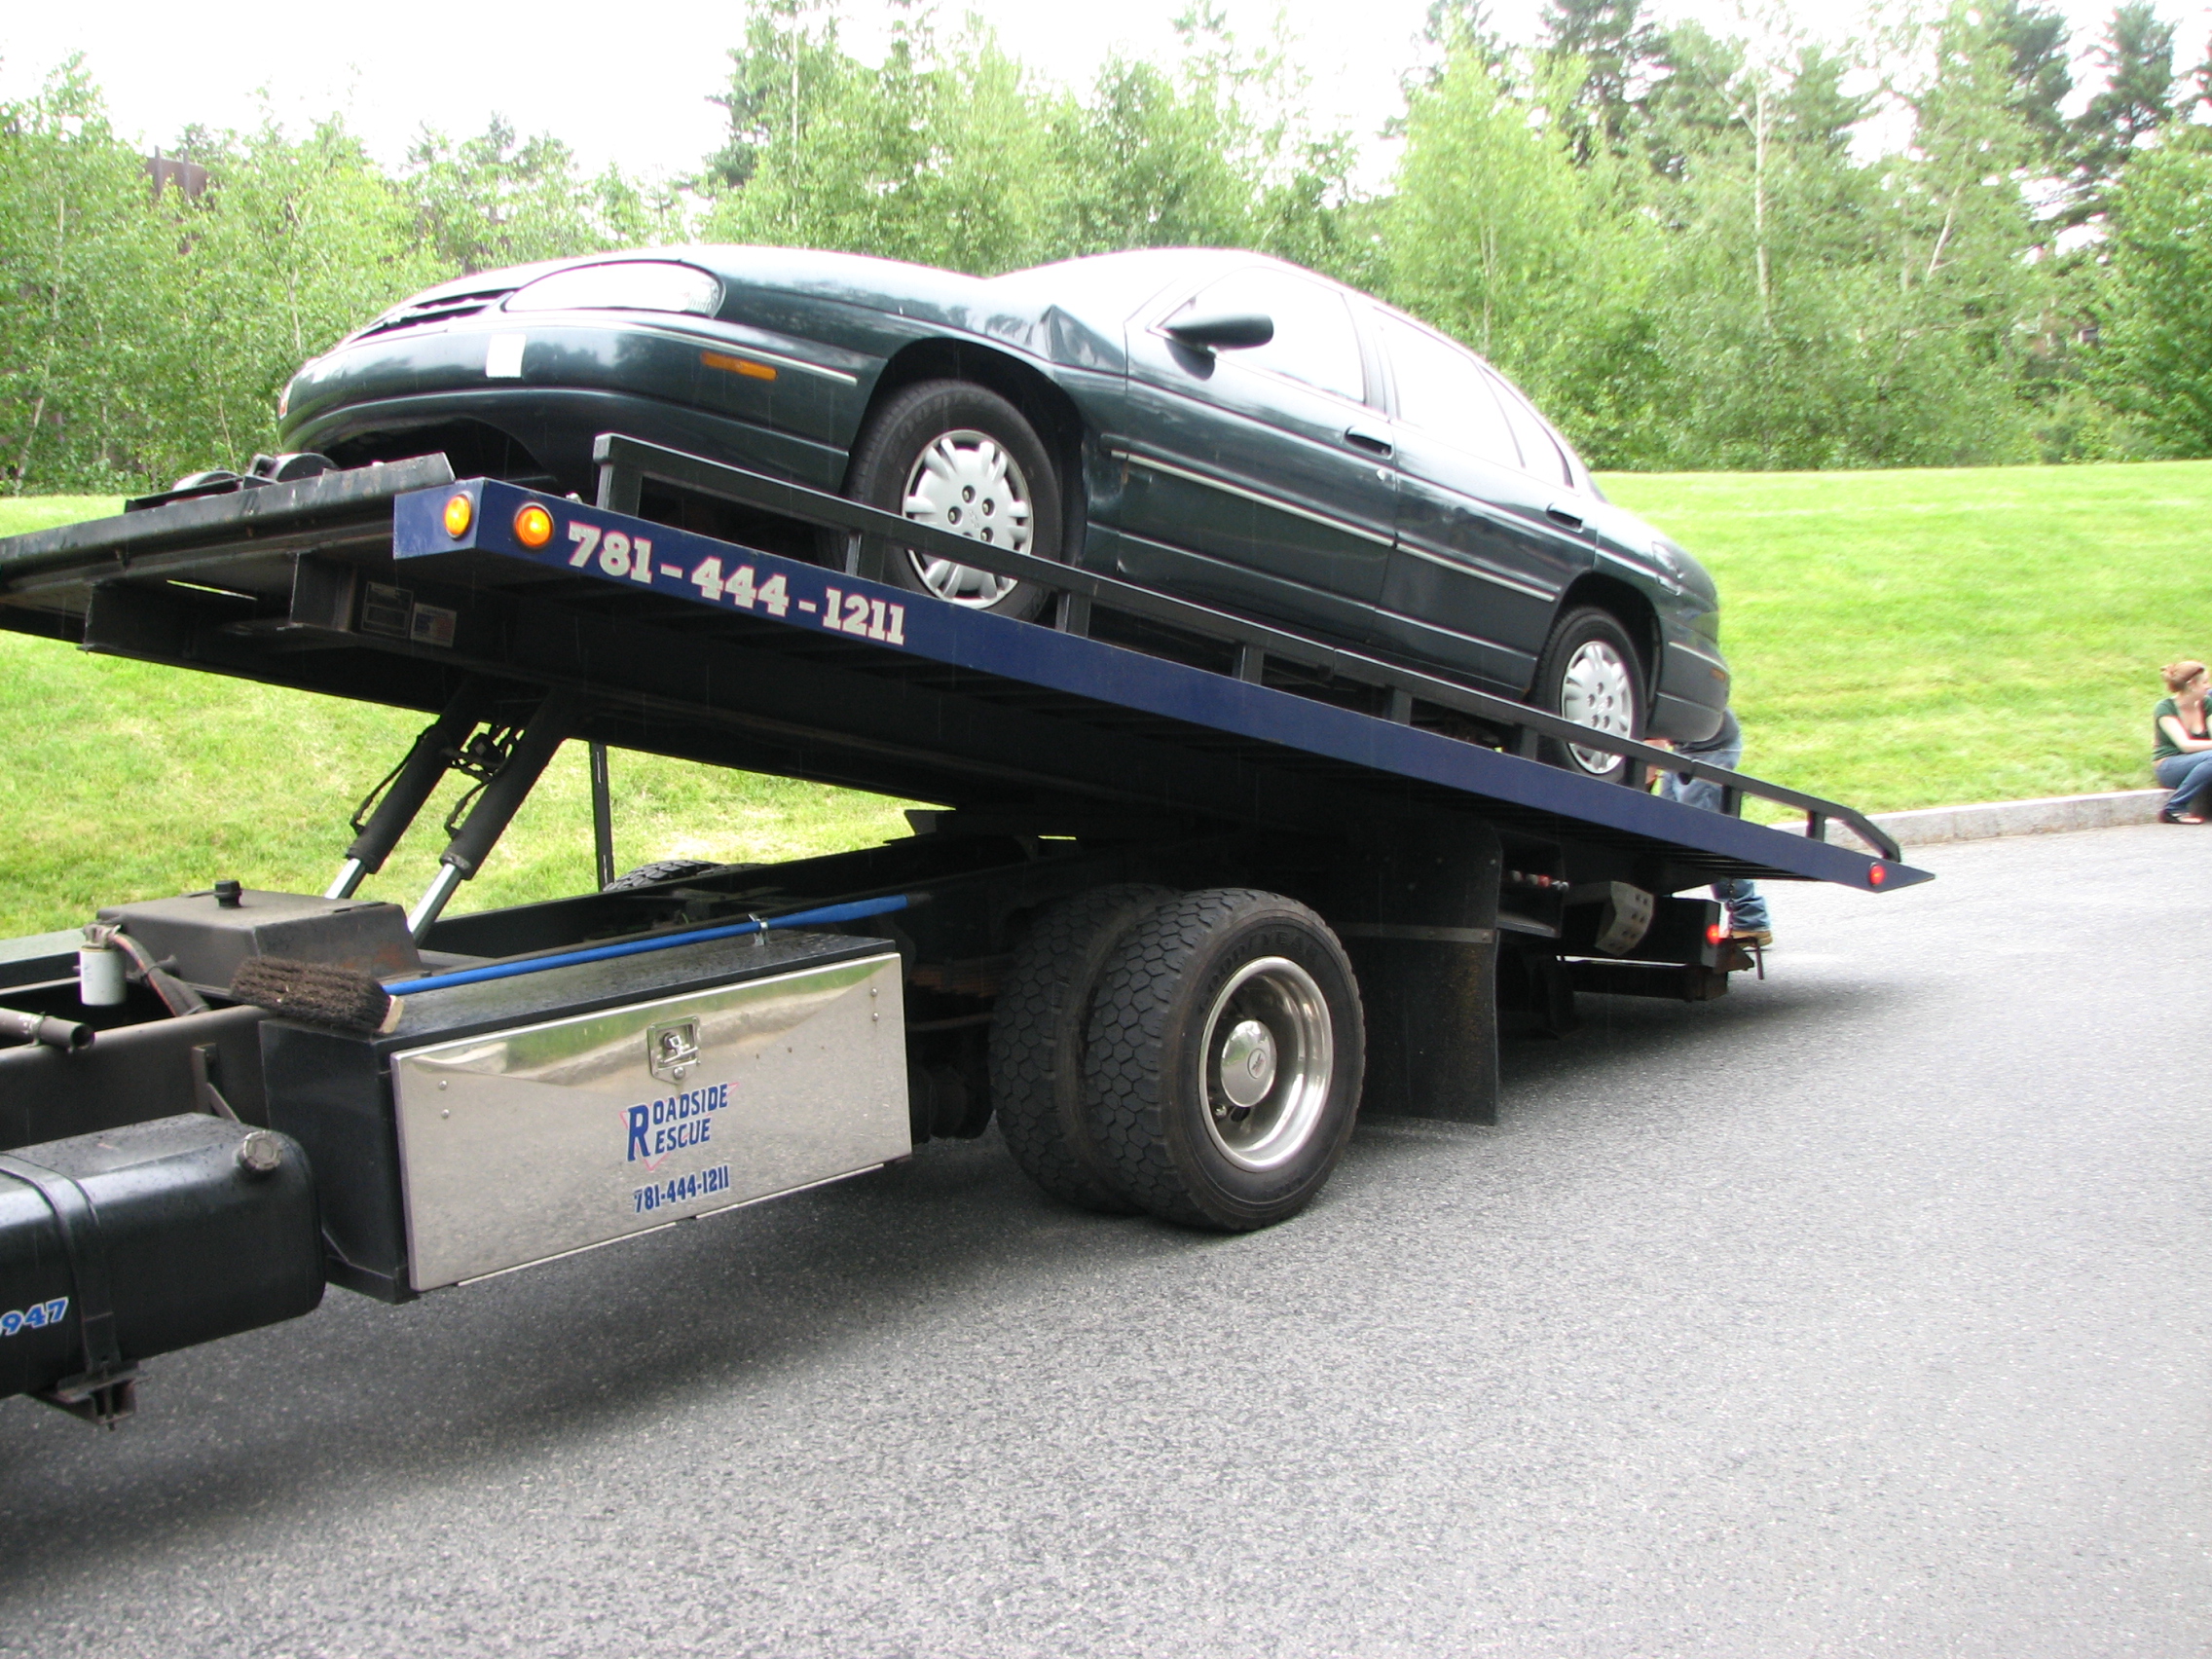 Car on tow truck photo